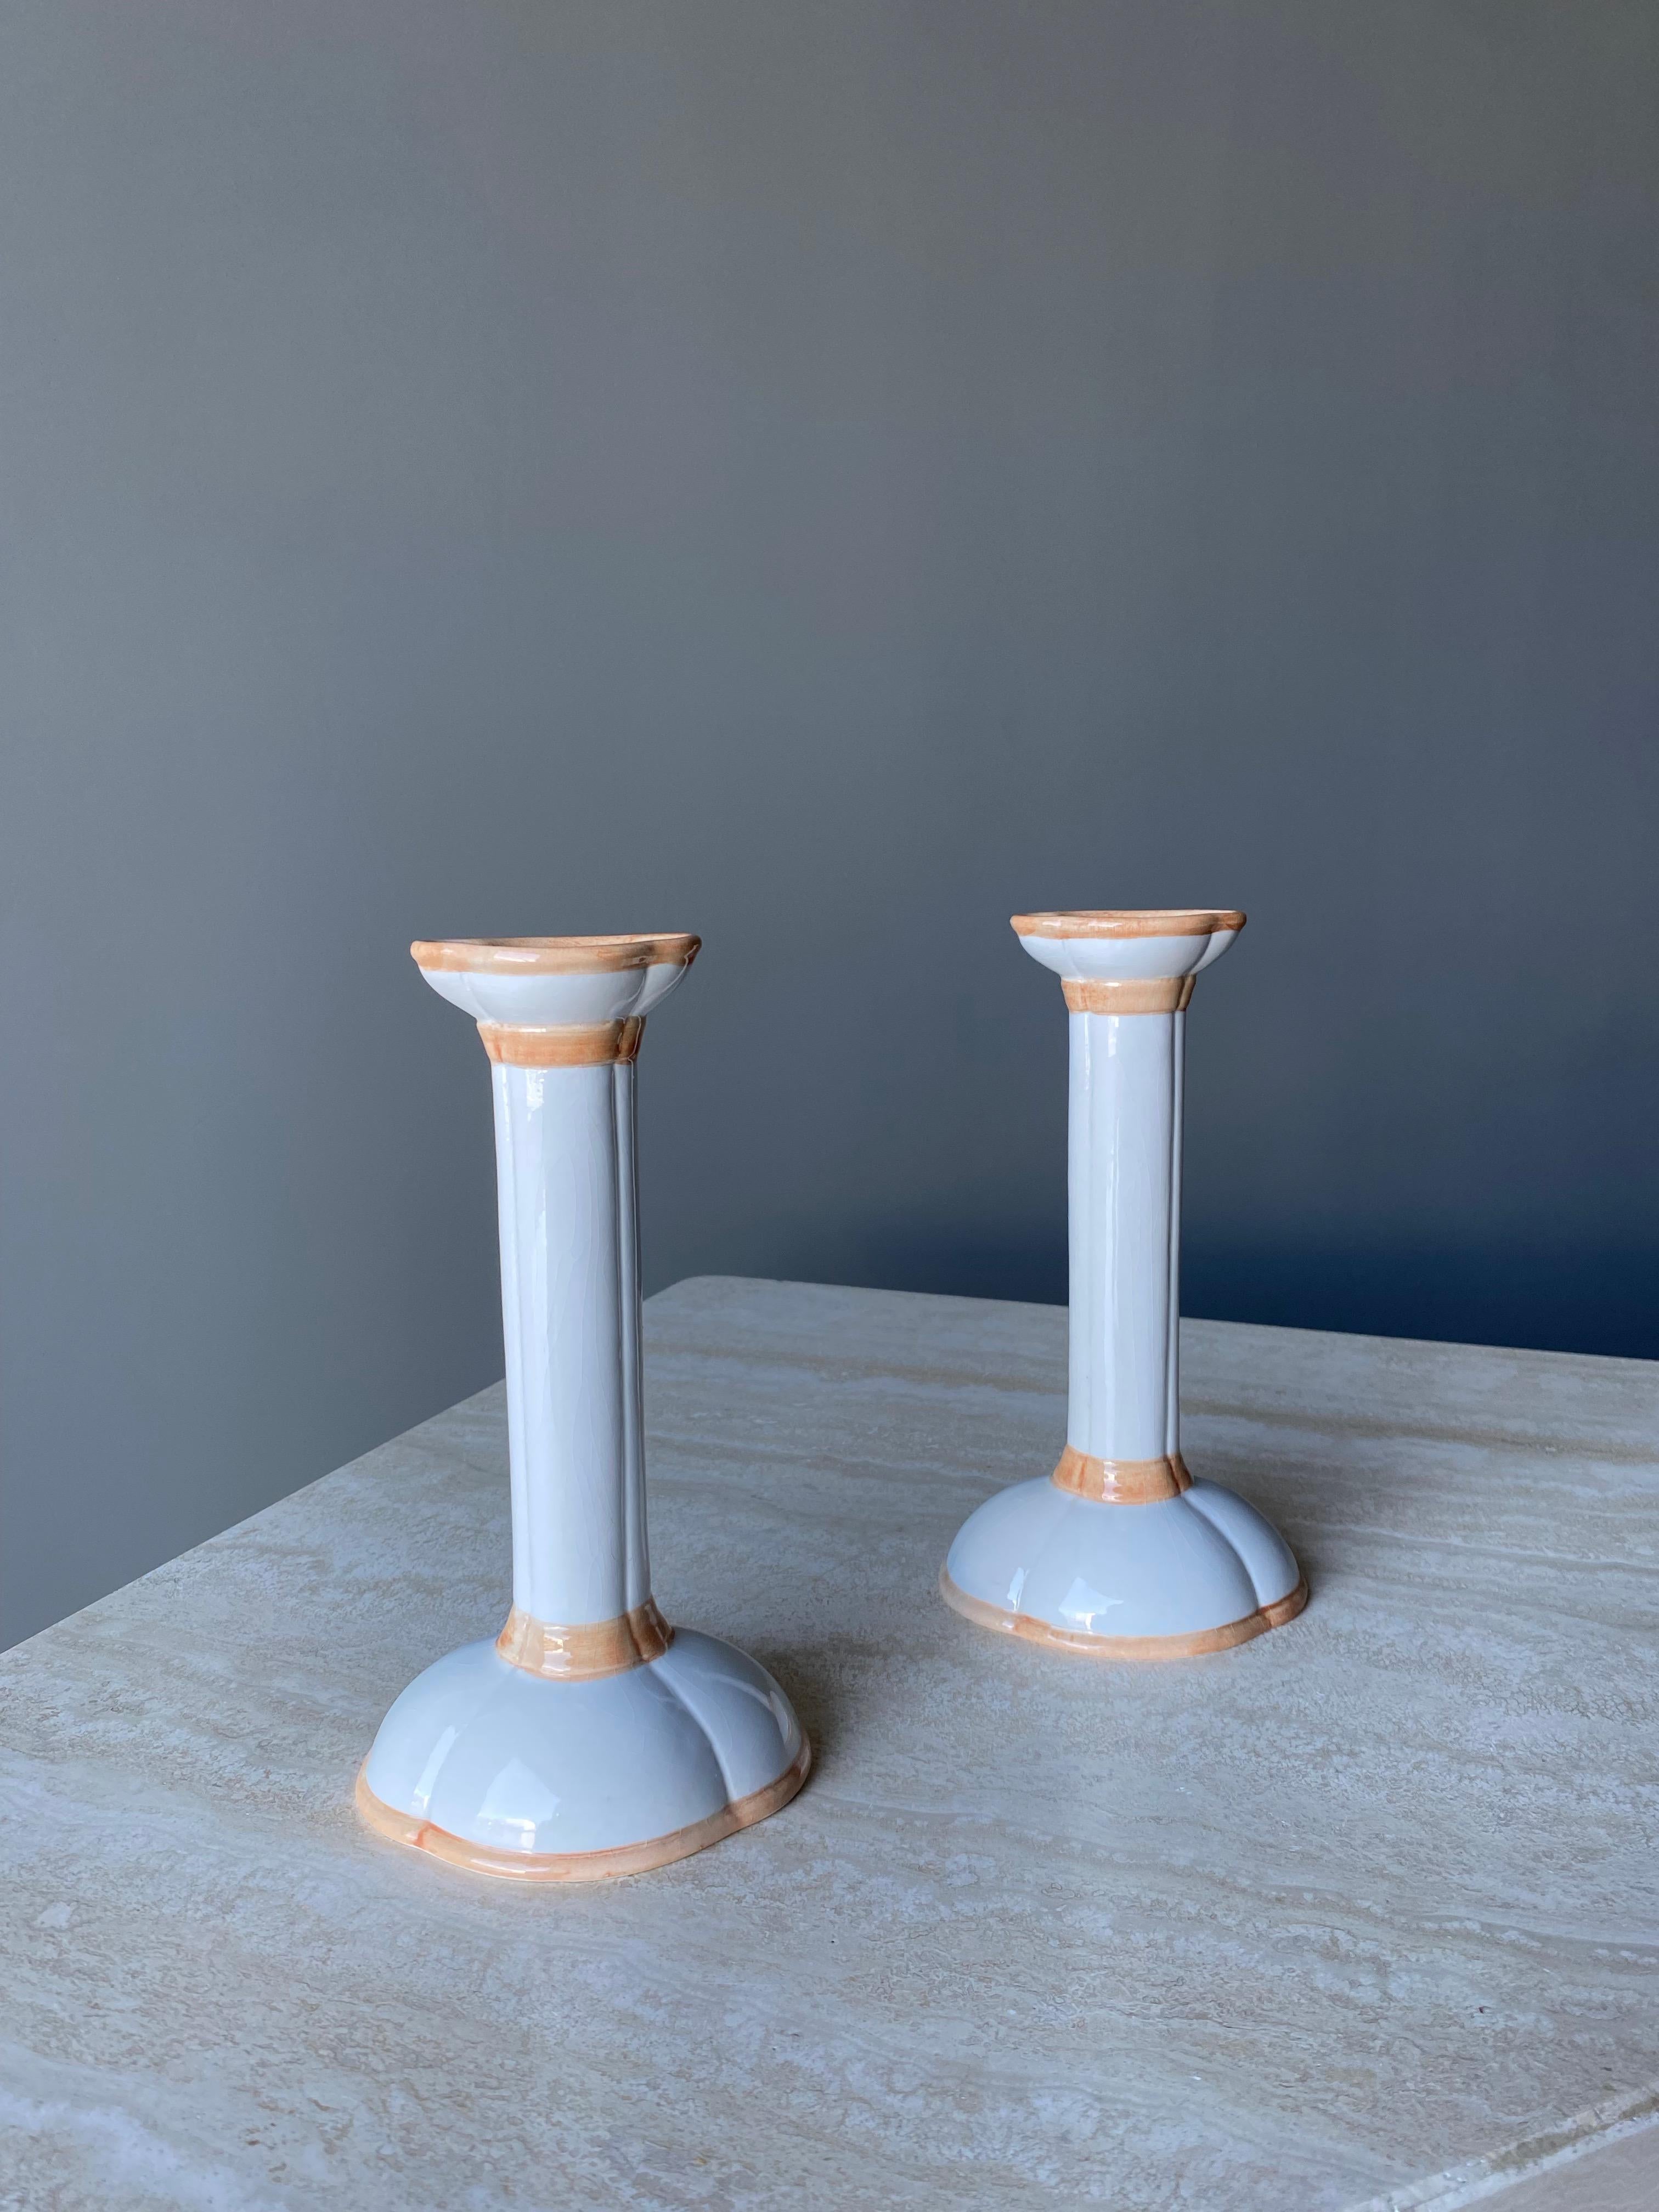 Italian Hand Painted Ceramic Candlesticks, 1960s For Sale 10